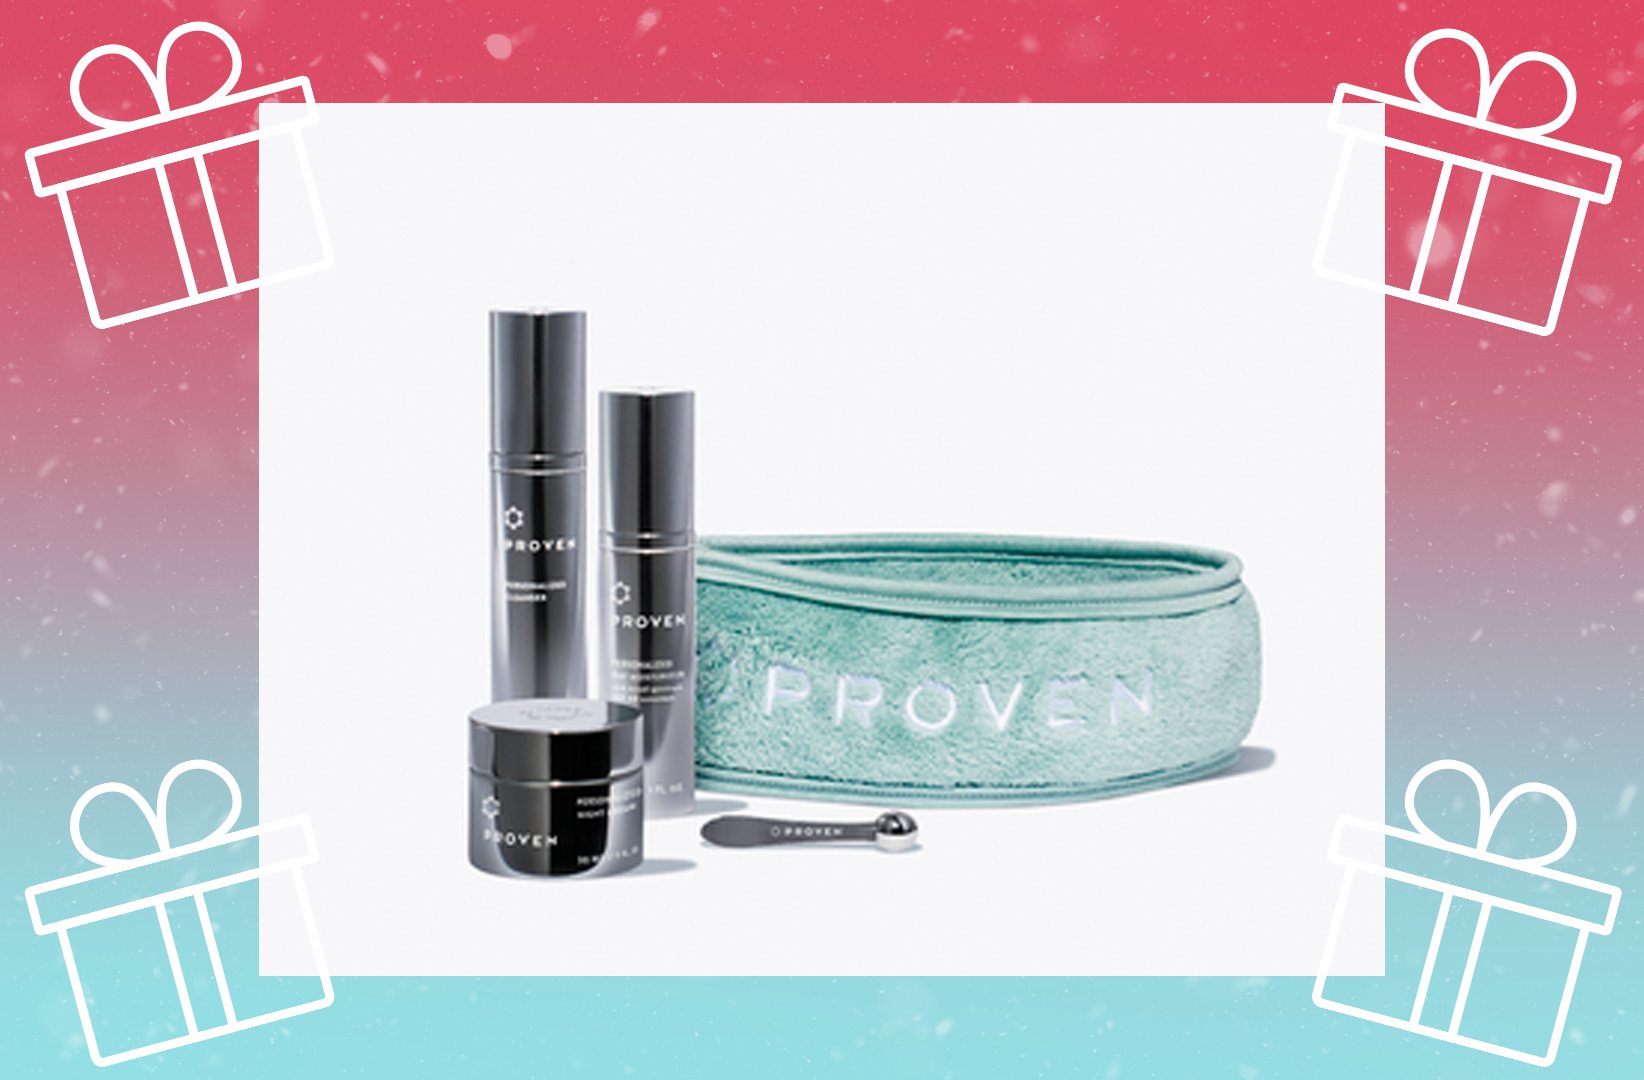 PROVEN Skincare is Having the Best Holiday Sale Ever – Here’s the Scoop